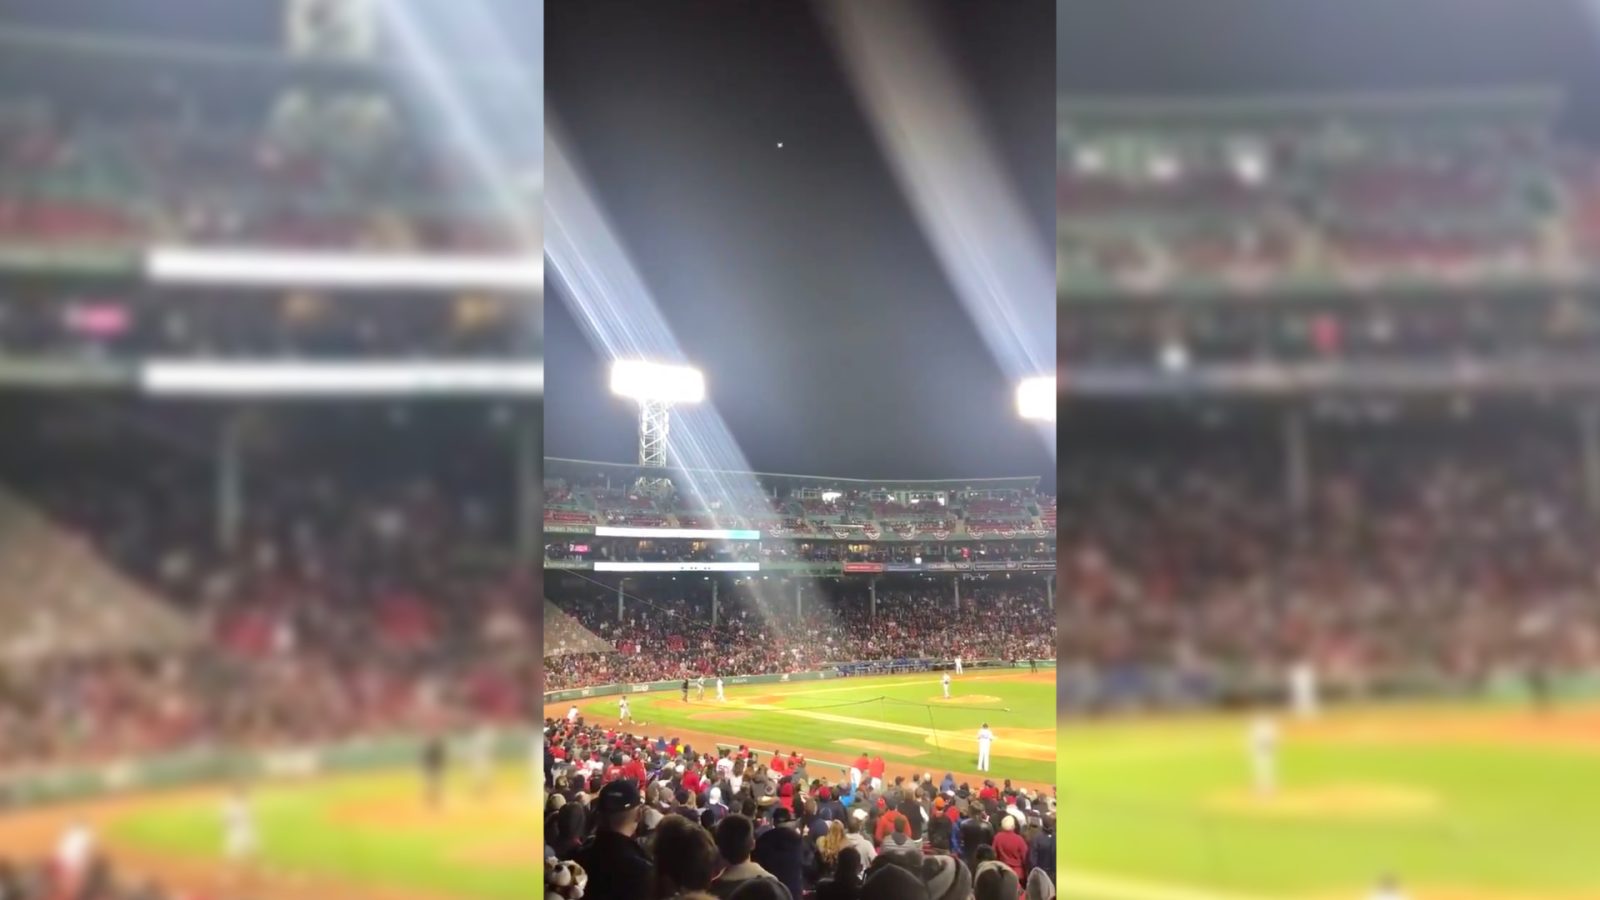 Drone illegally flew over Fenway Park during Red Sox game